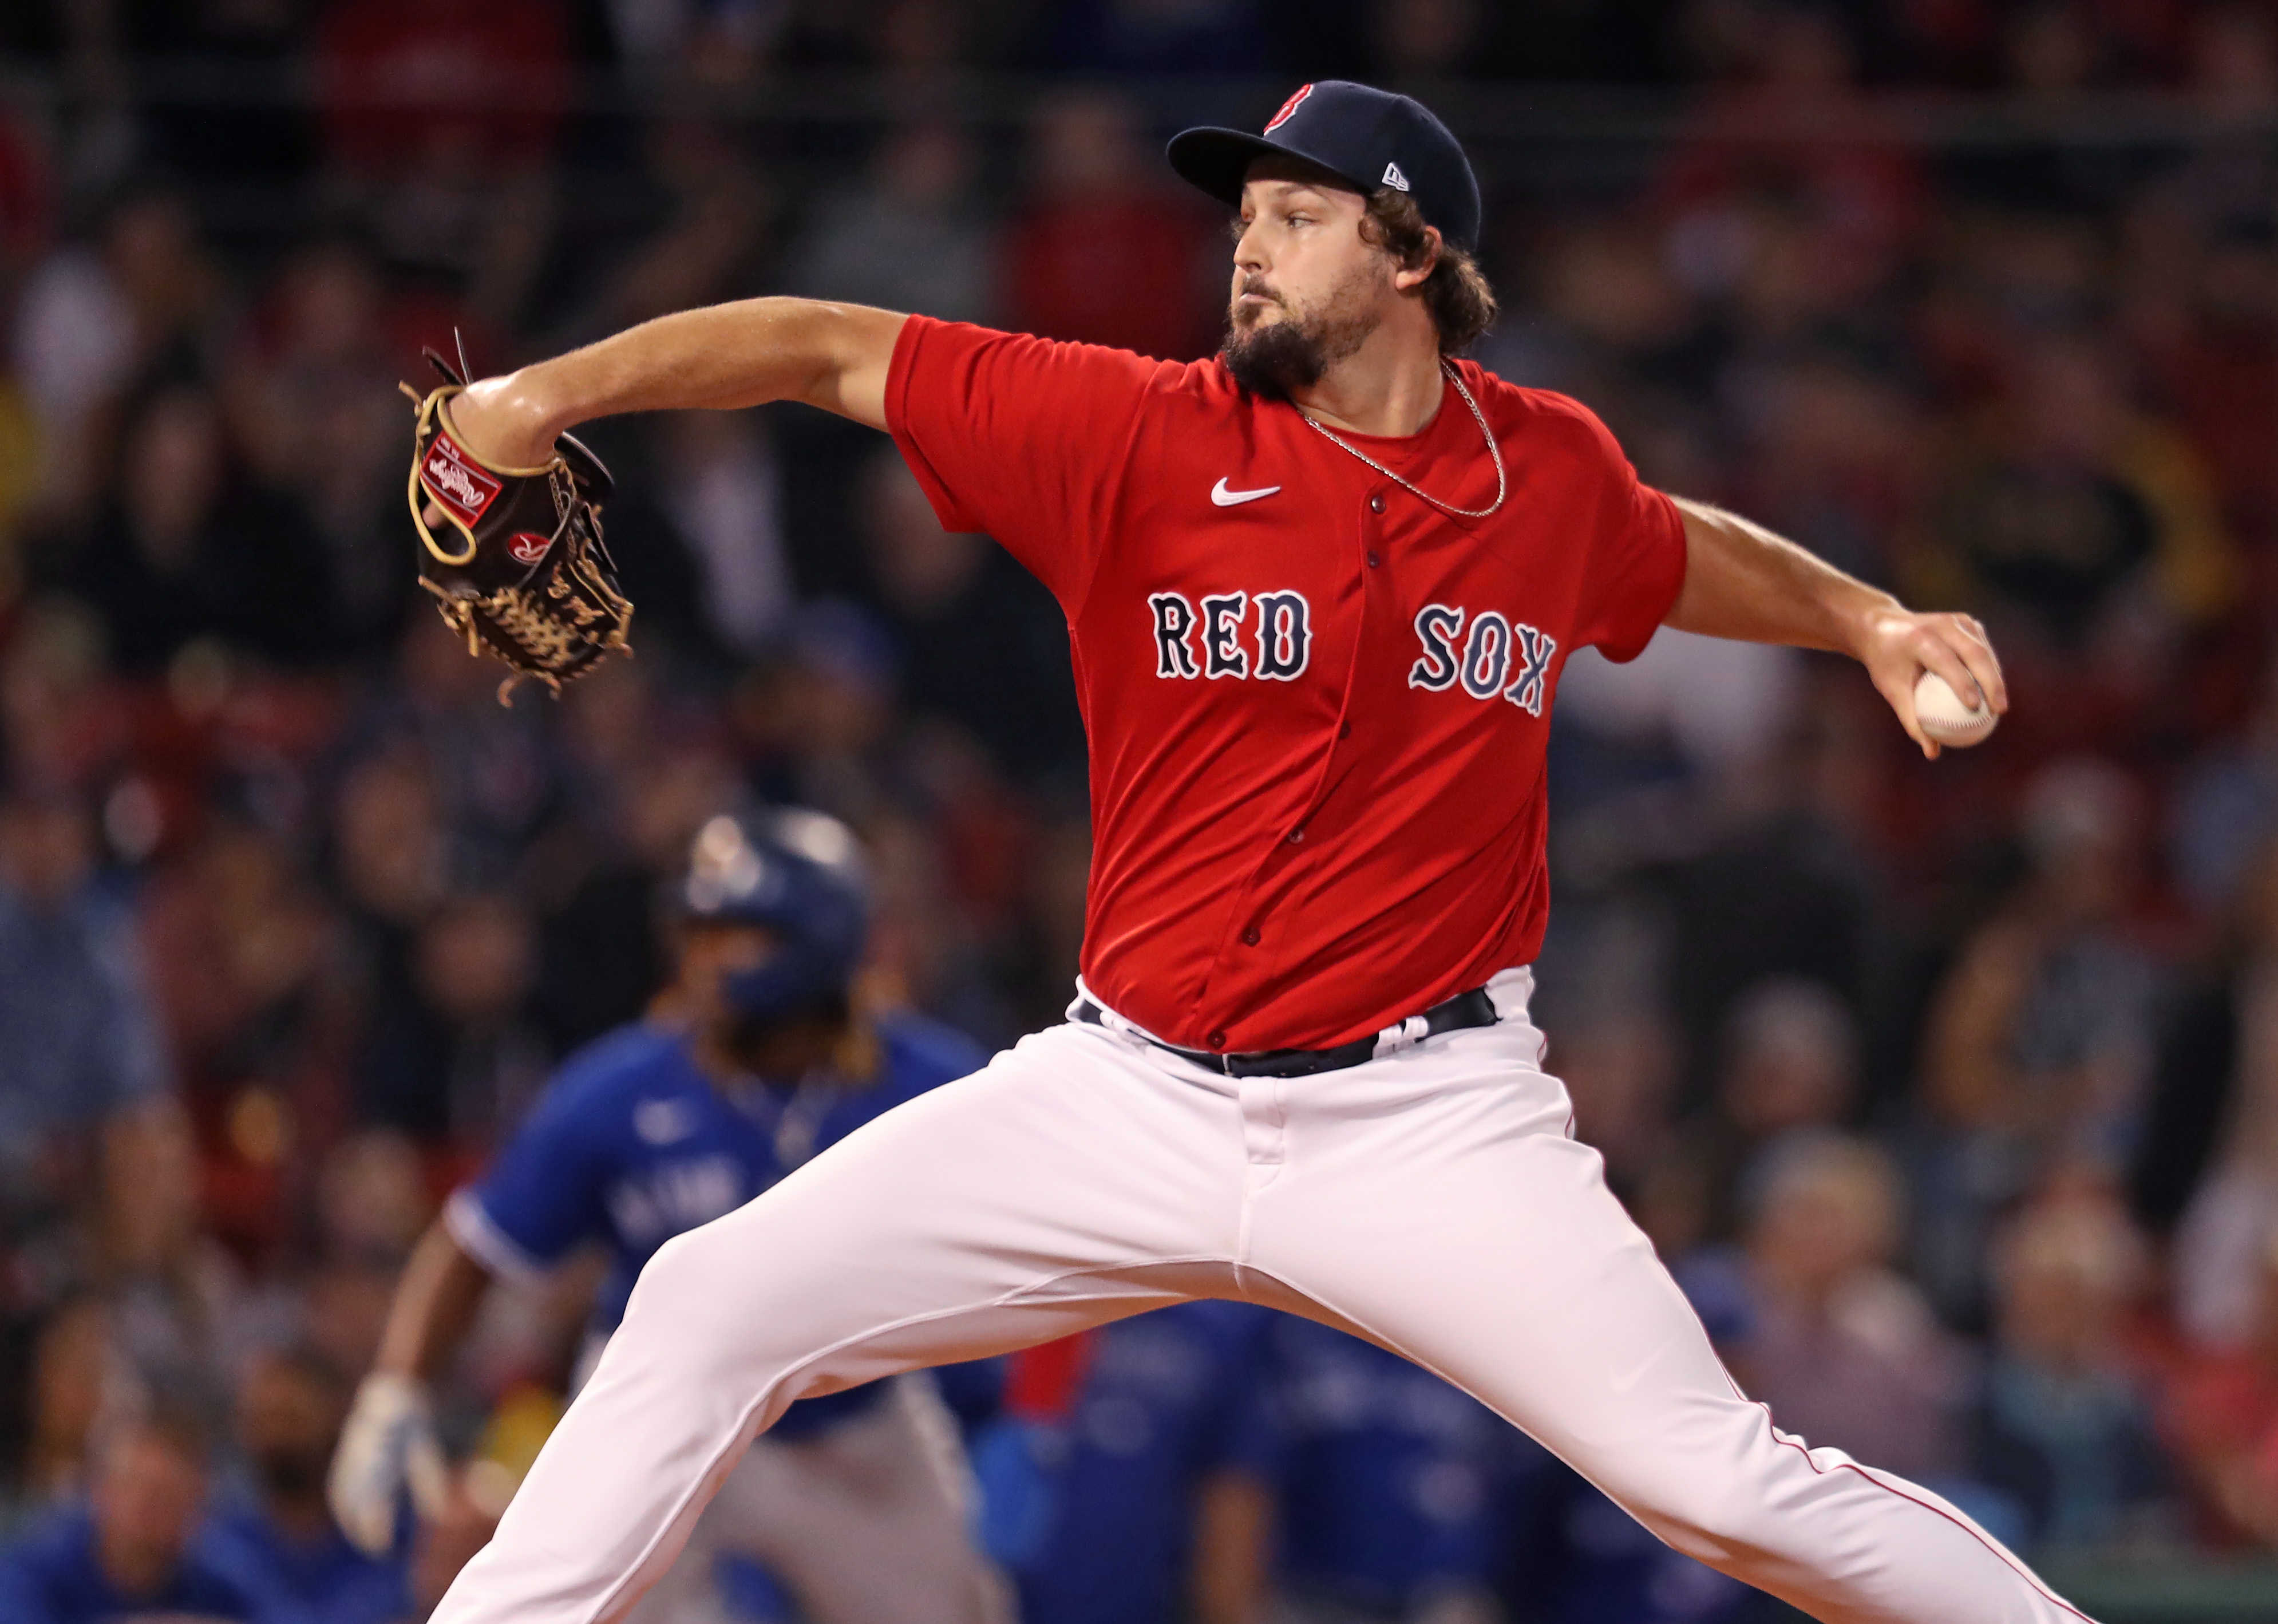 Neither wind, rain delay, nor triple play could derail the Red Sox